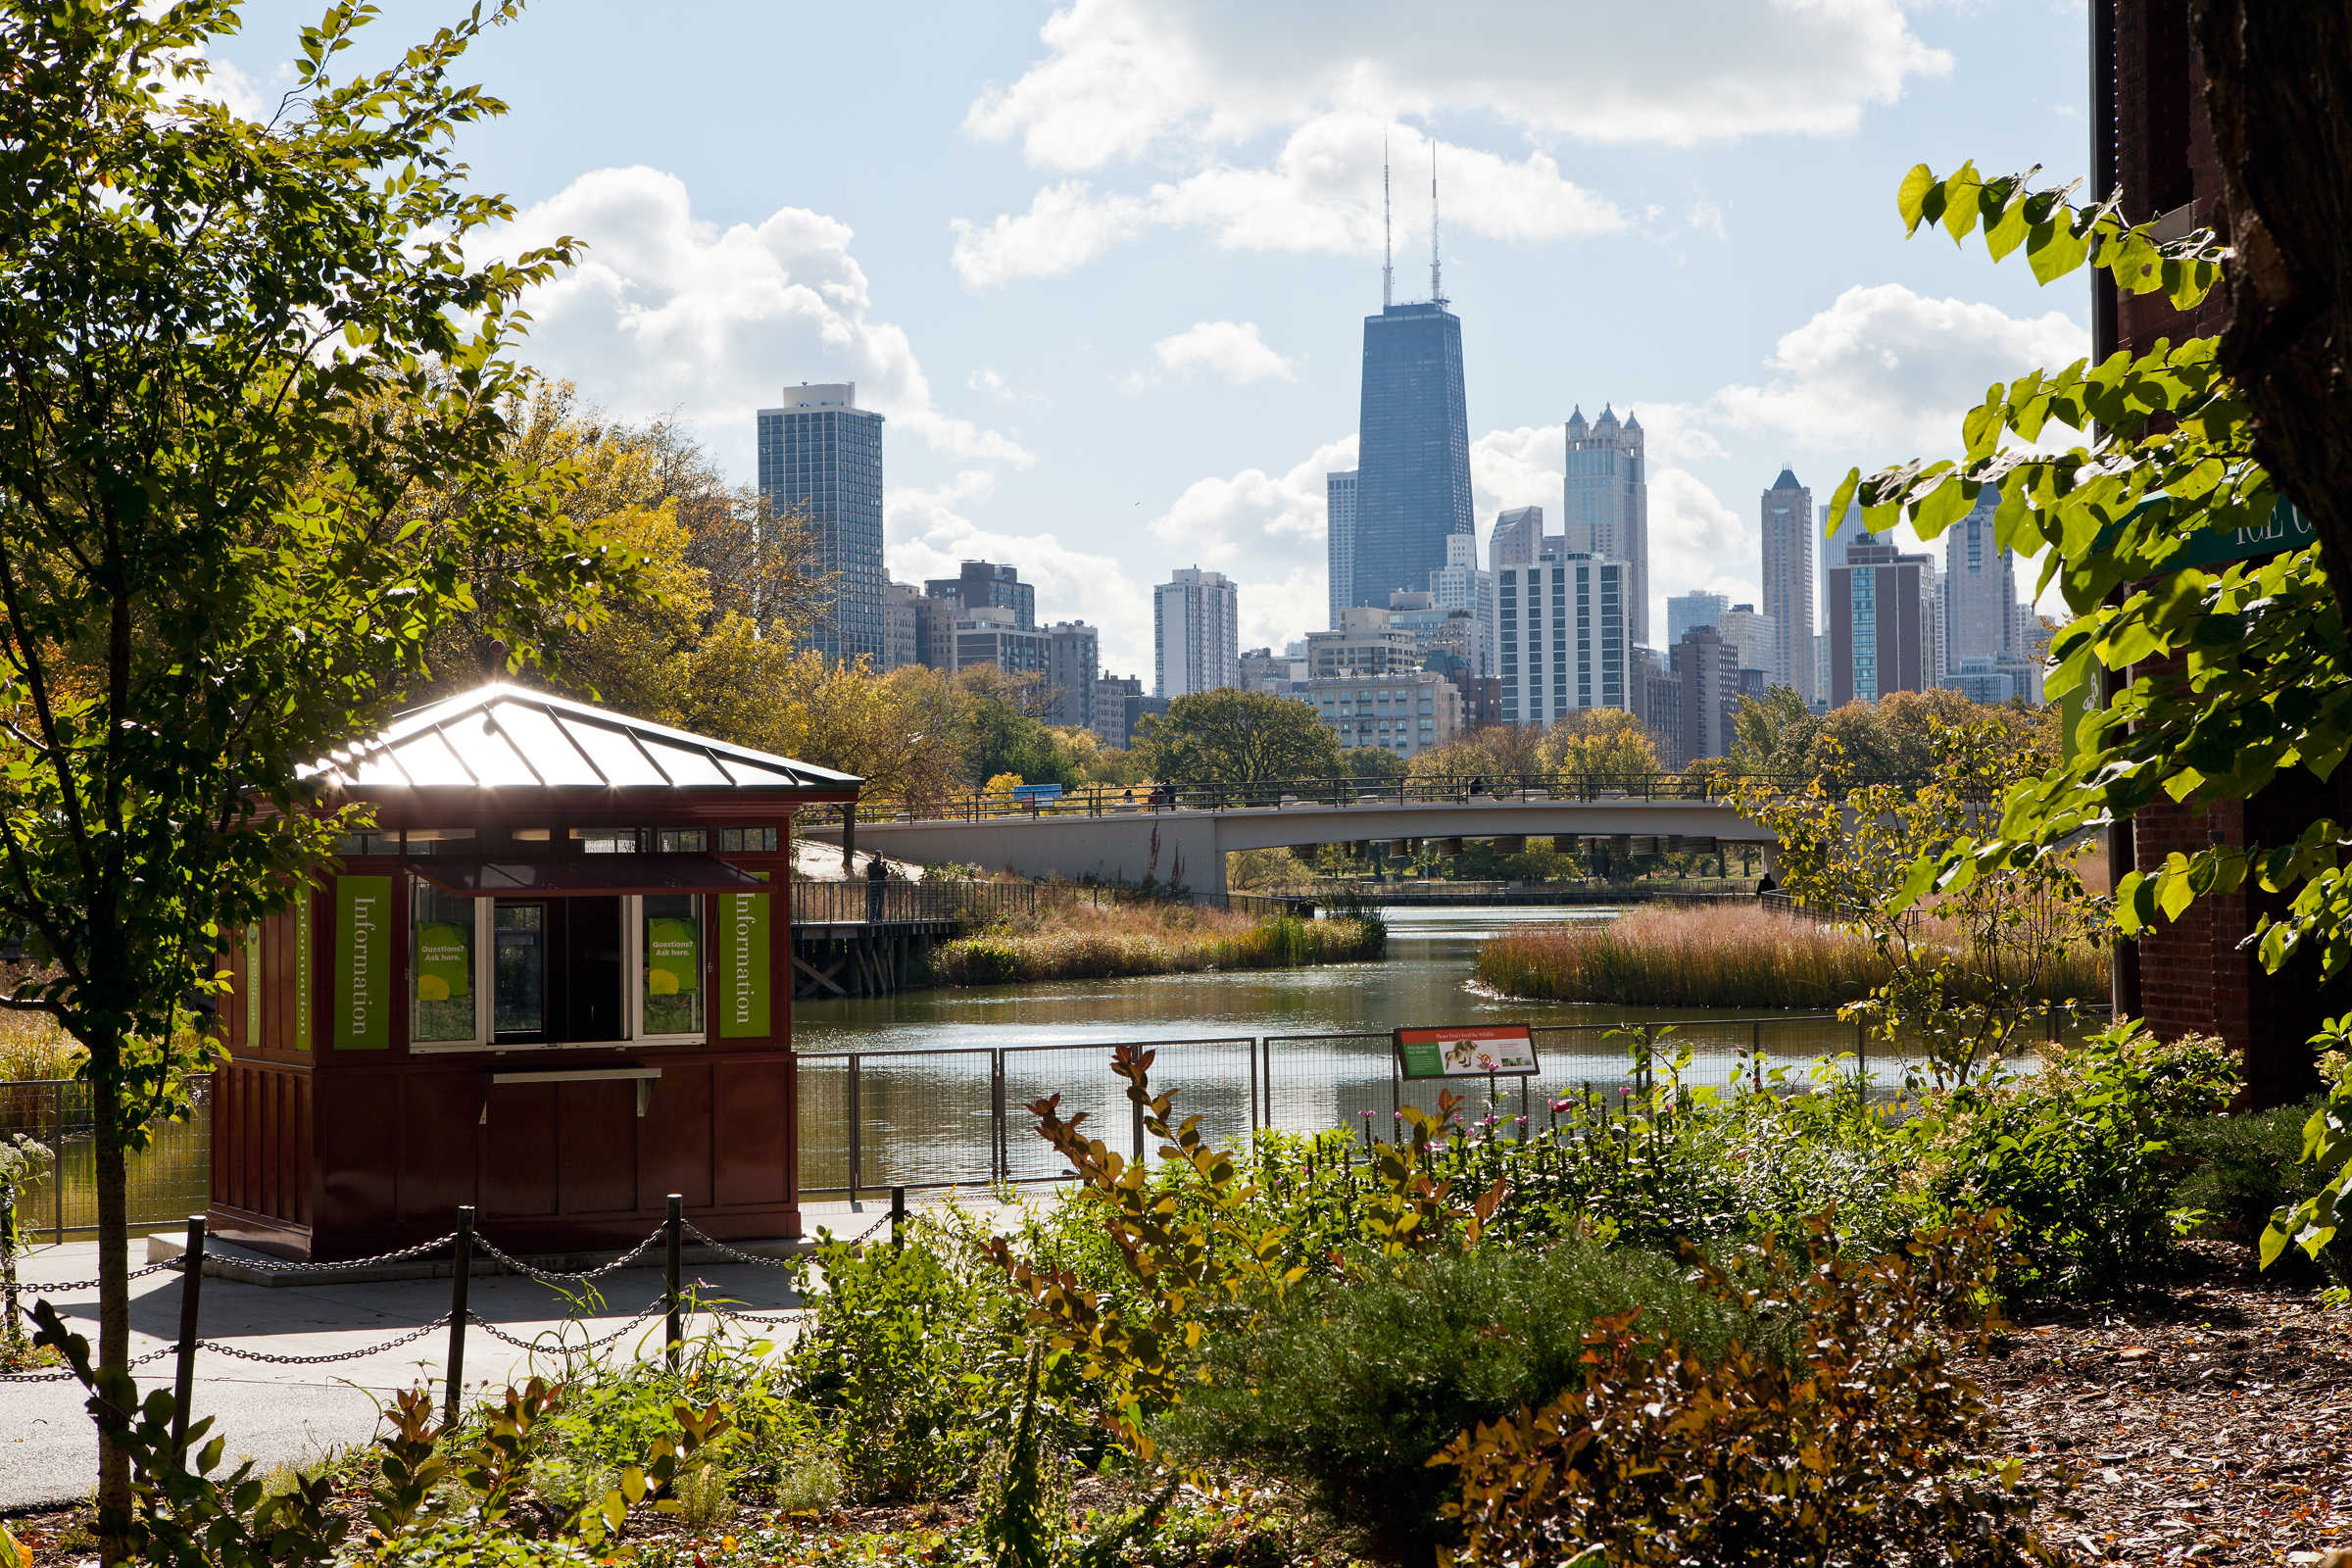 Nature Boardwalk at Lincoln Park Zoo: a haven for native wildlife